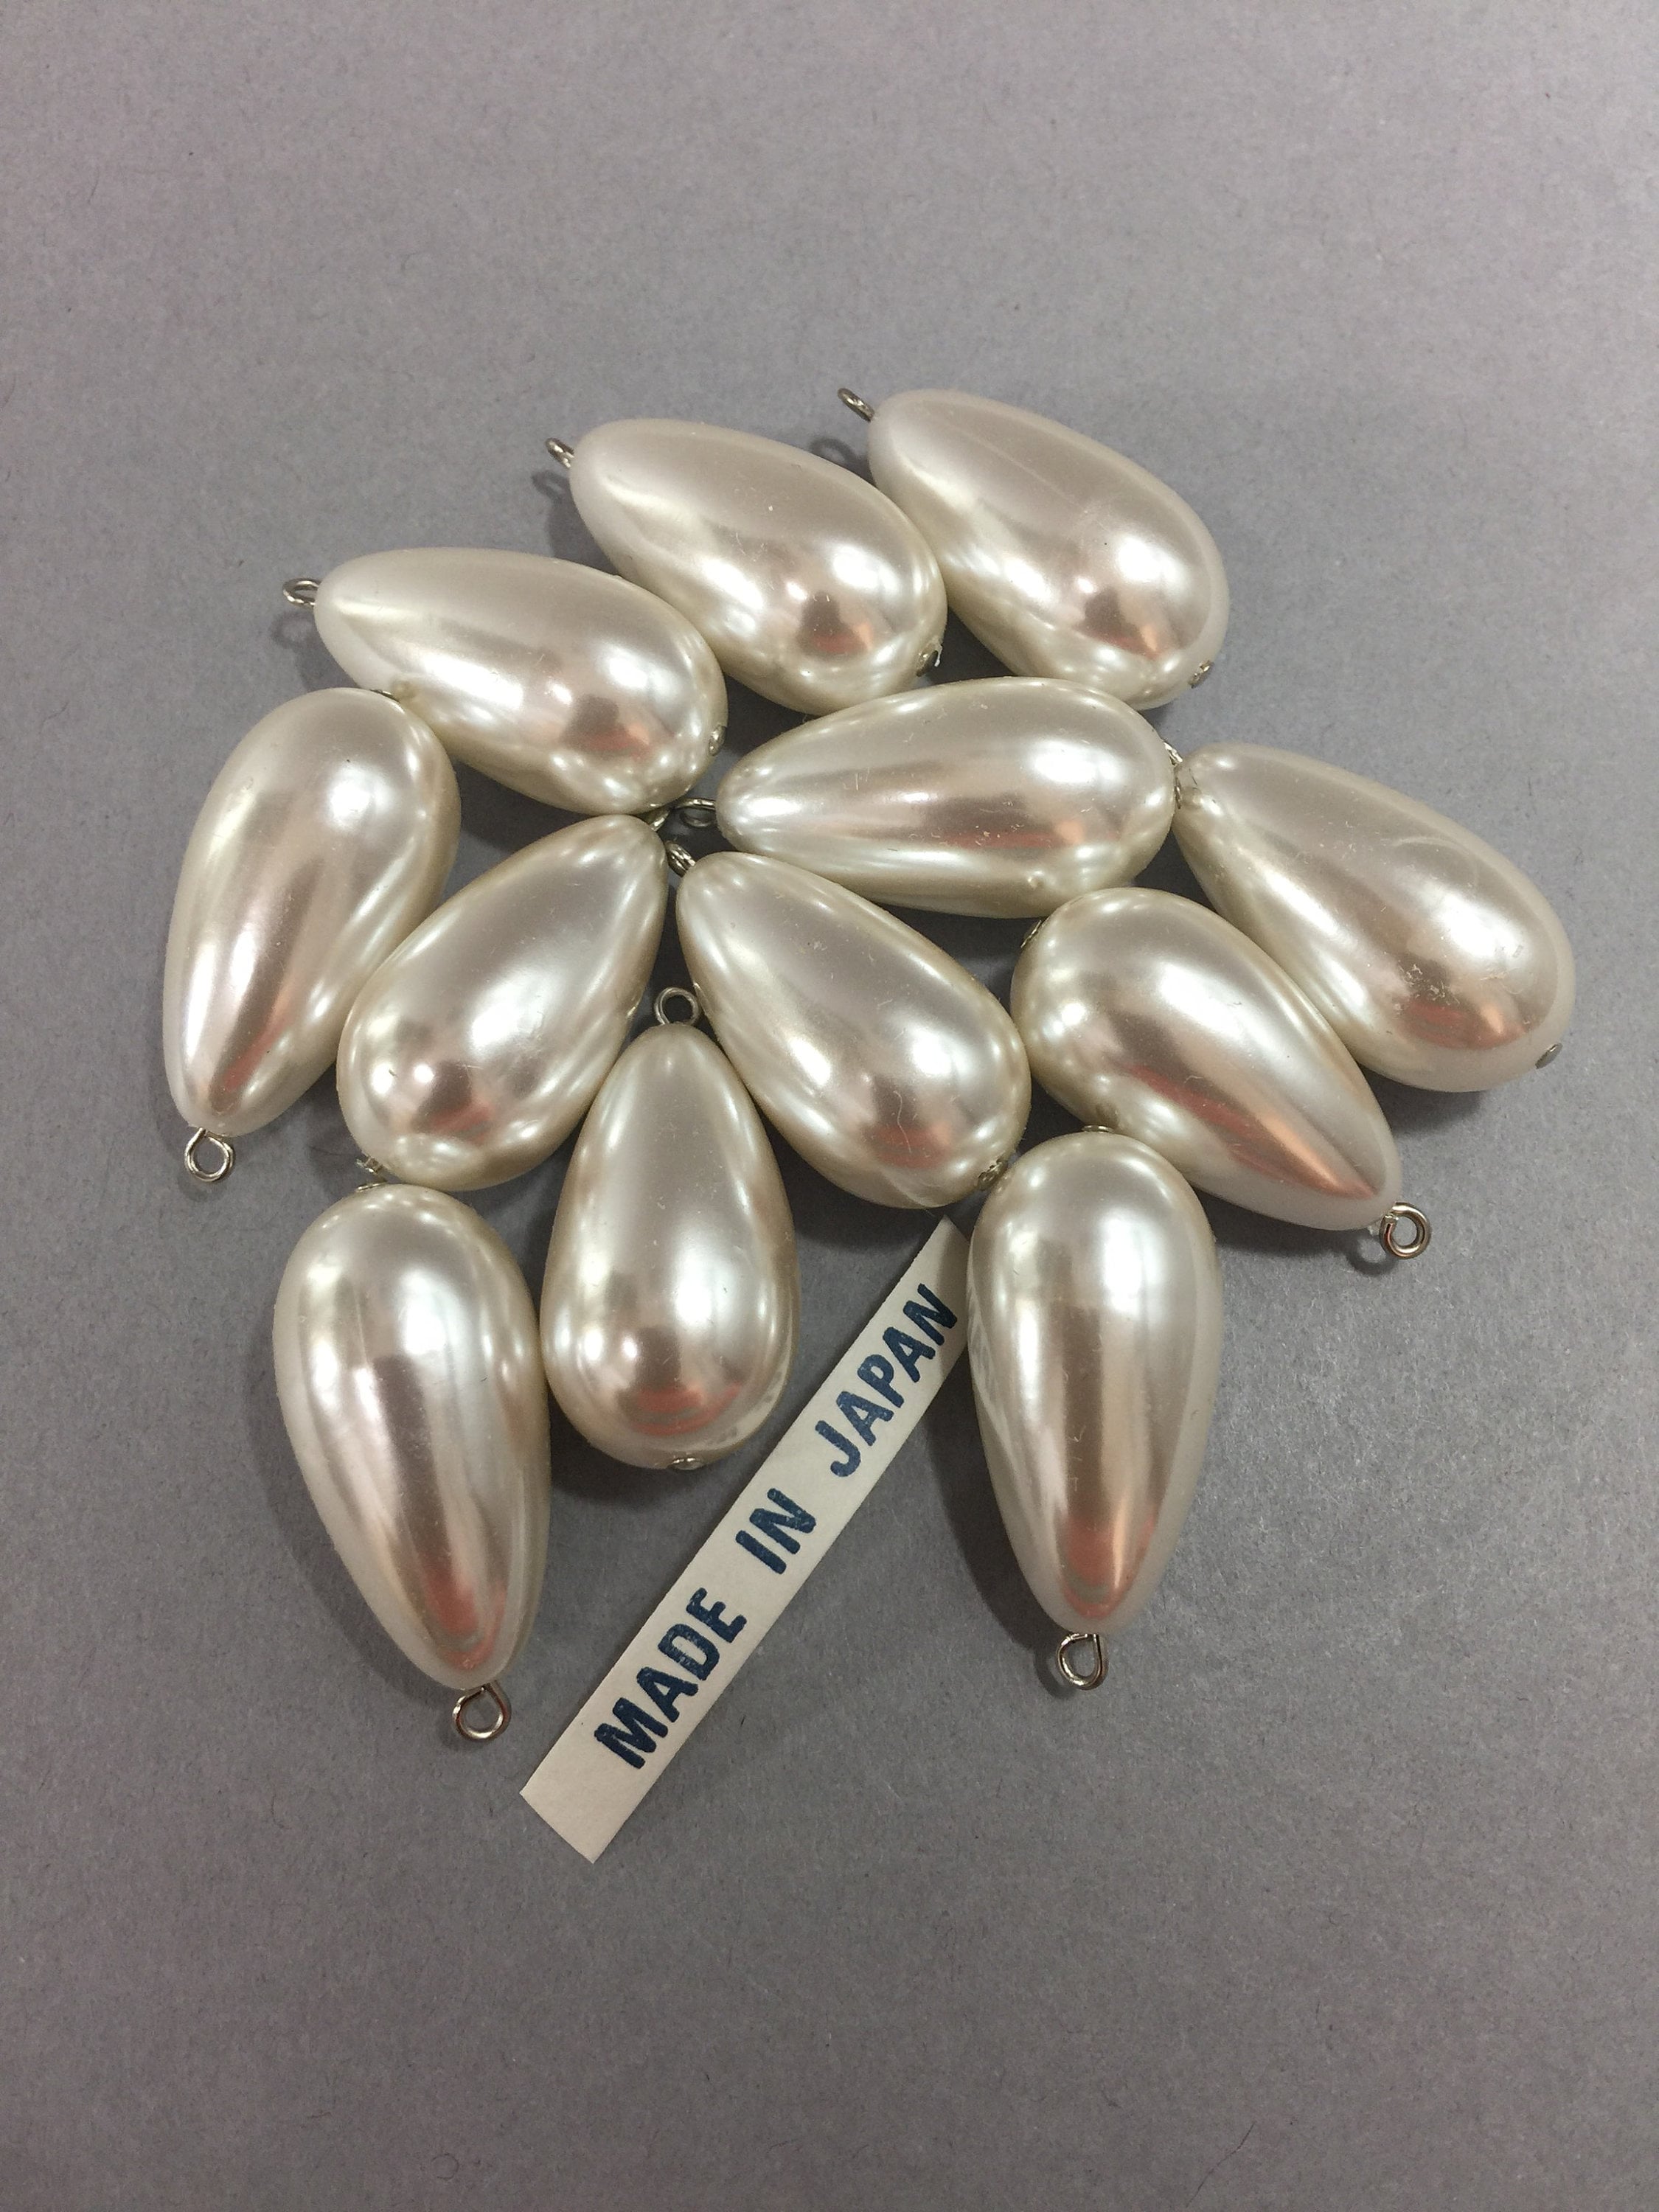 200pcs Sewing Pearl Beads ， Sew on Pearls for Clothes, Crafts Pearls with  Silver Claw, Half Round Sew on Beads White Pearls(Silver Claw, 8mm 200pcs)